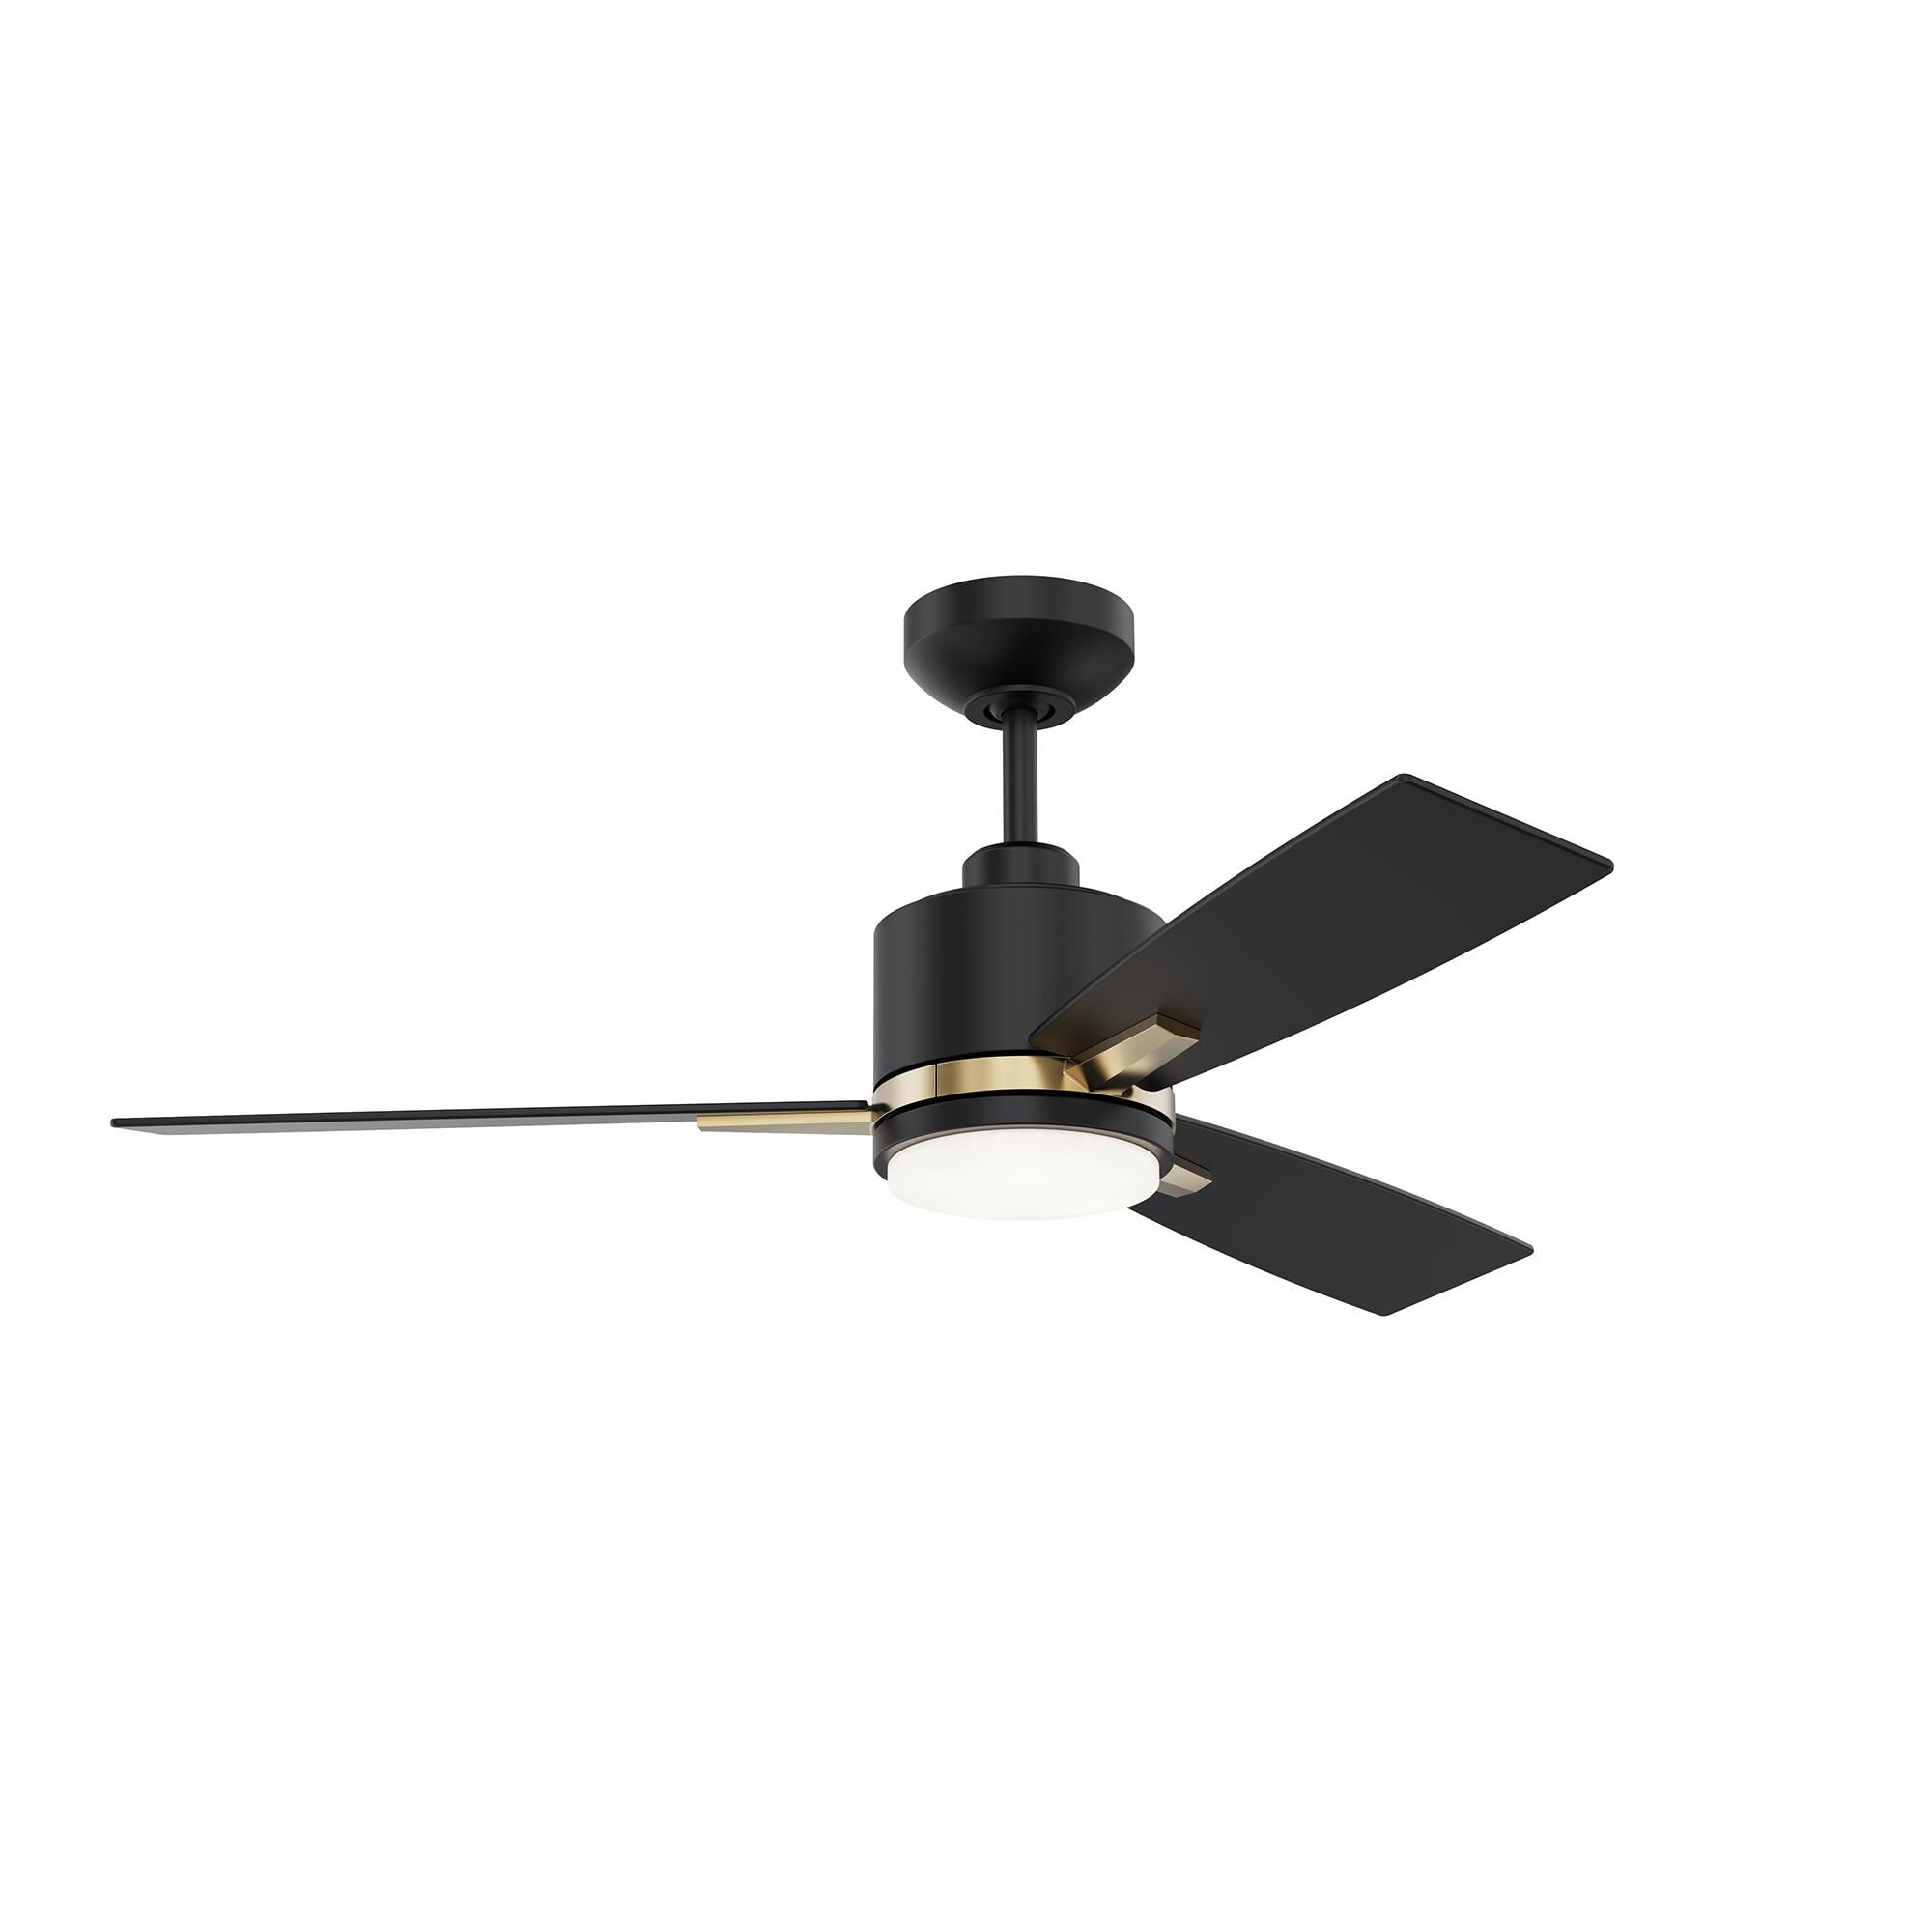 Photos - Fan Kendal Lighting Nuvel 42 Inch Ceiling  with Light Kit Nuvel - AC30842-B